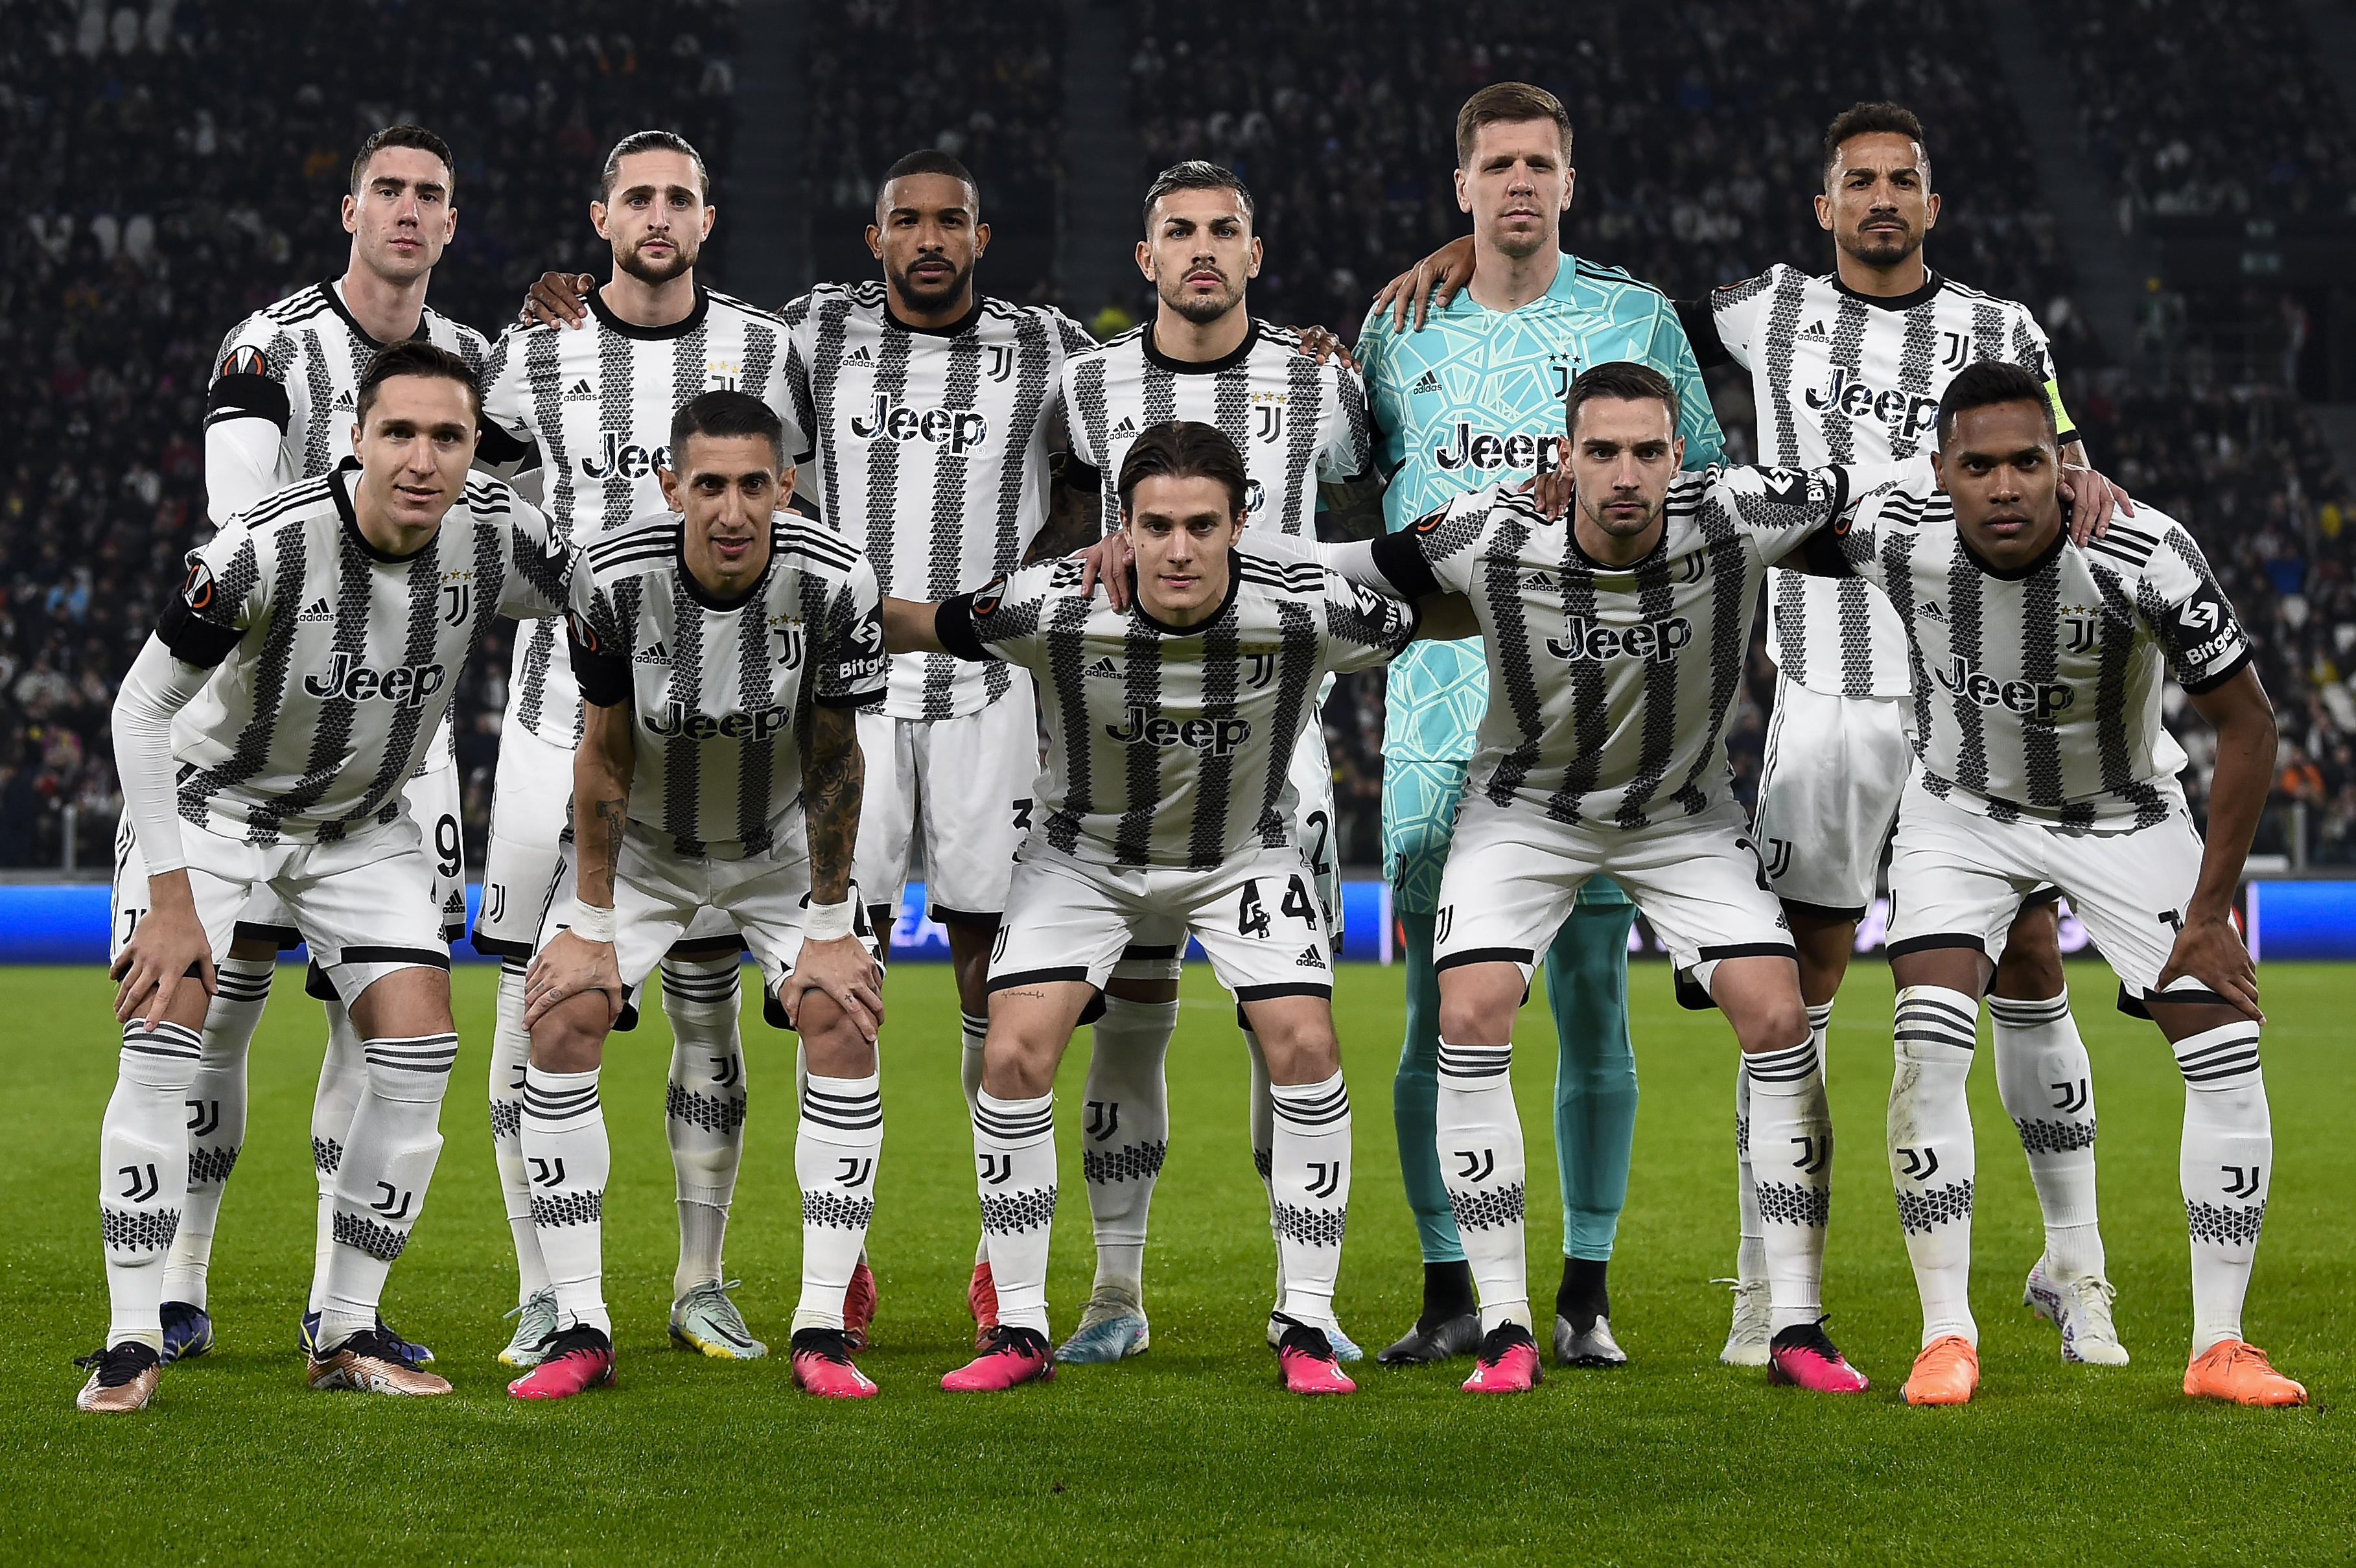 Players of Juventus FC pose for a team photo prior to the...